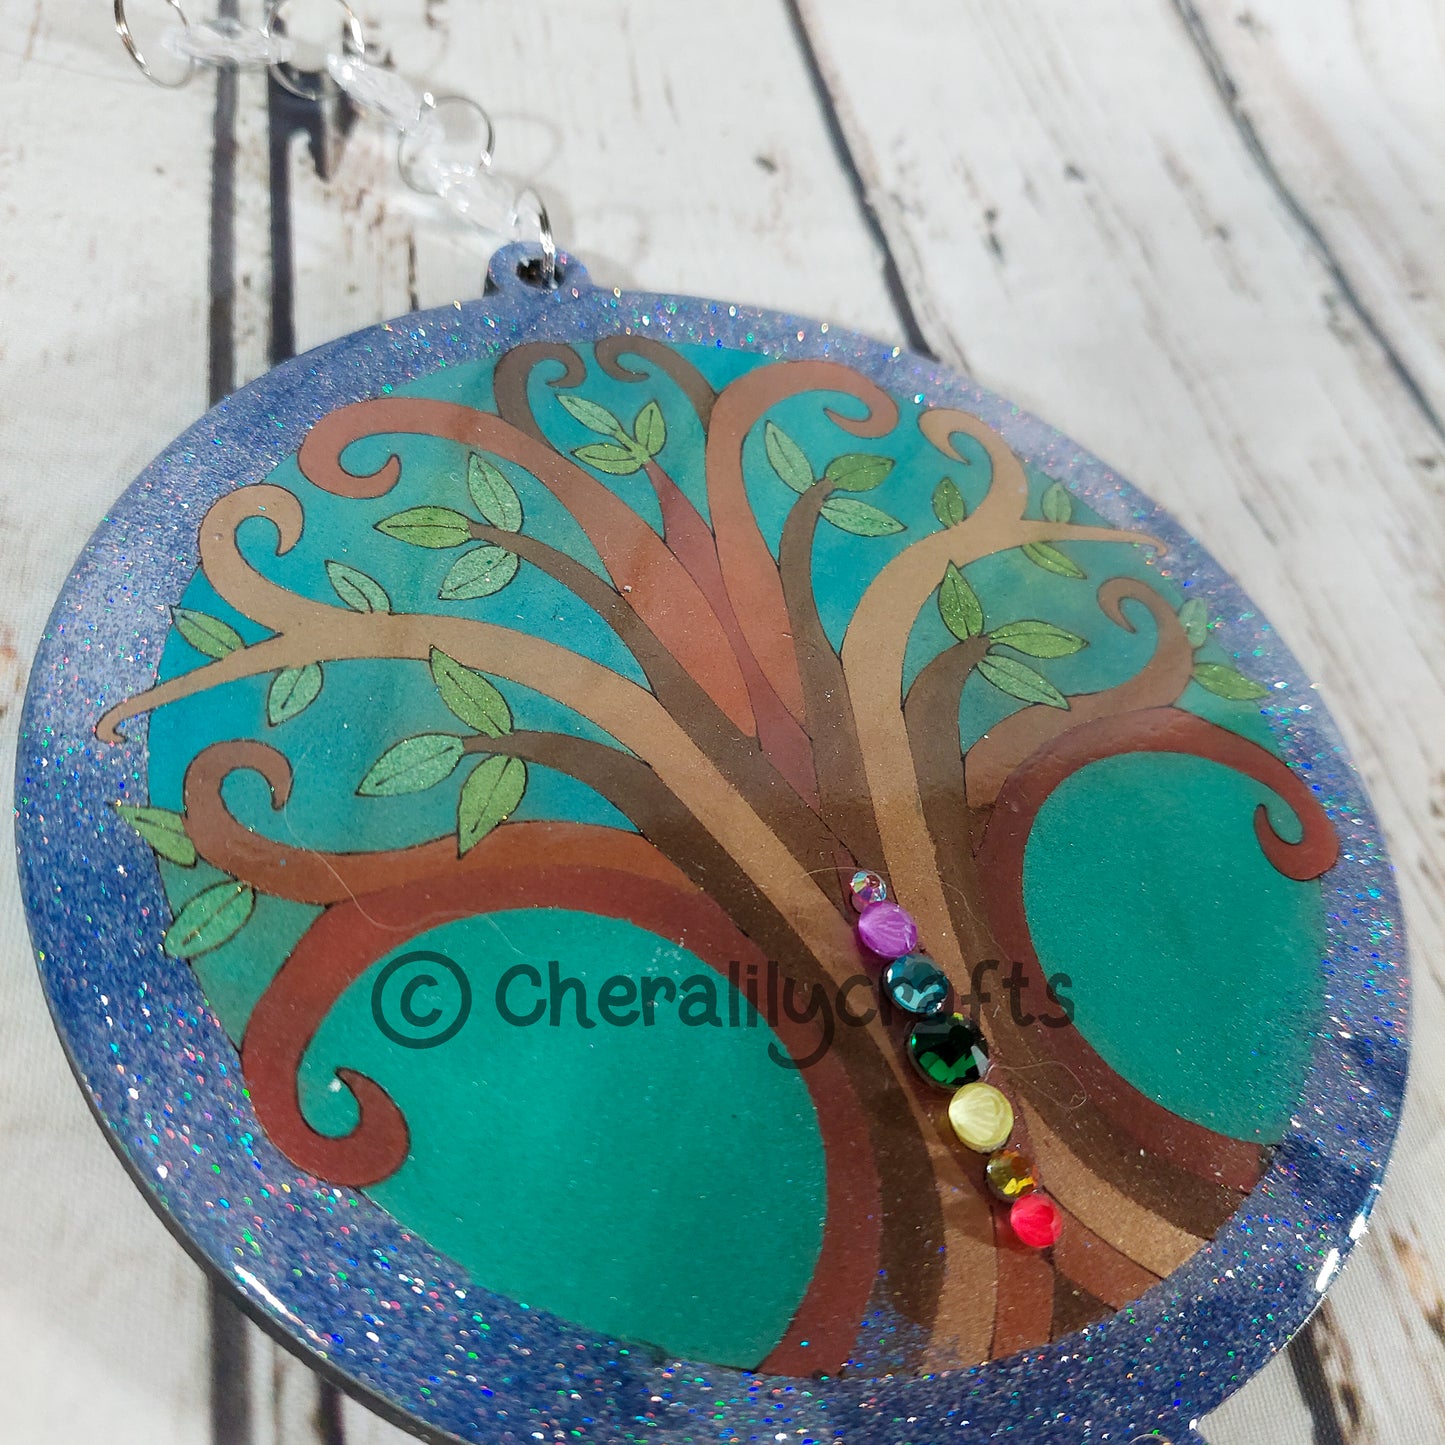 Tree of Life Round Wood/Resin Decor with Crystals